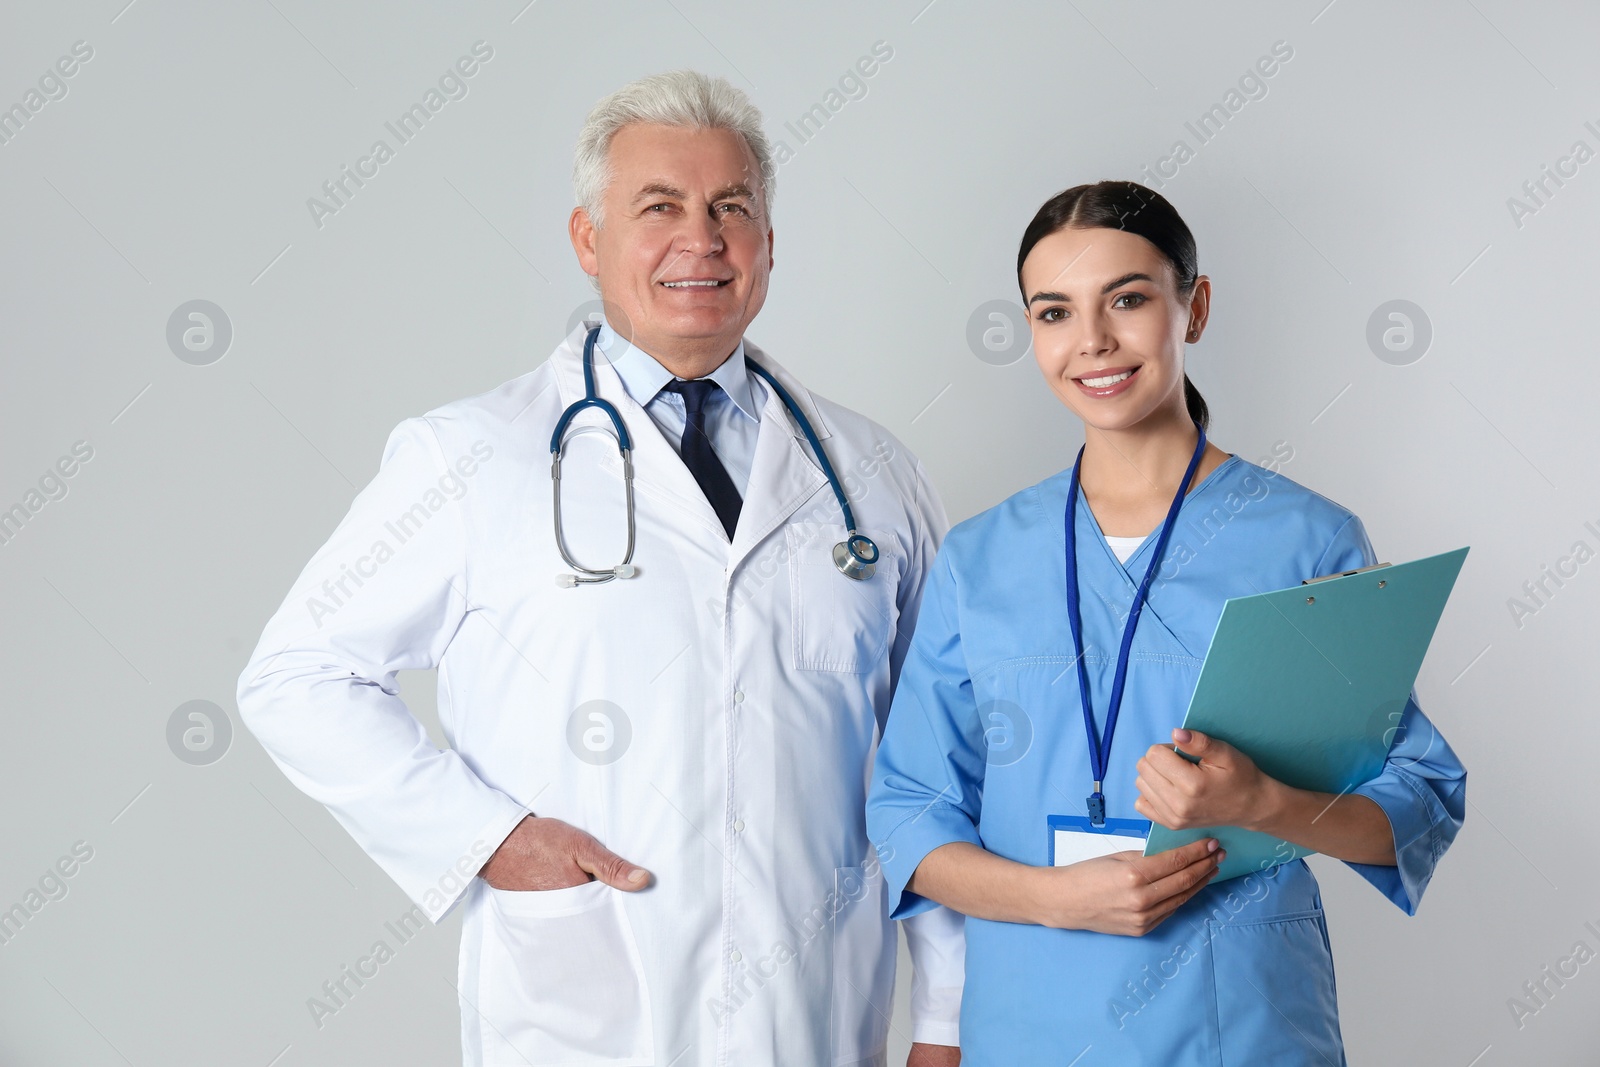 Photo of Senior doctor and young nurse against light background